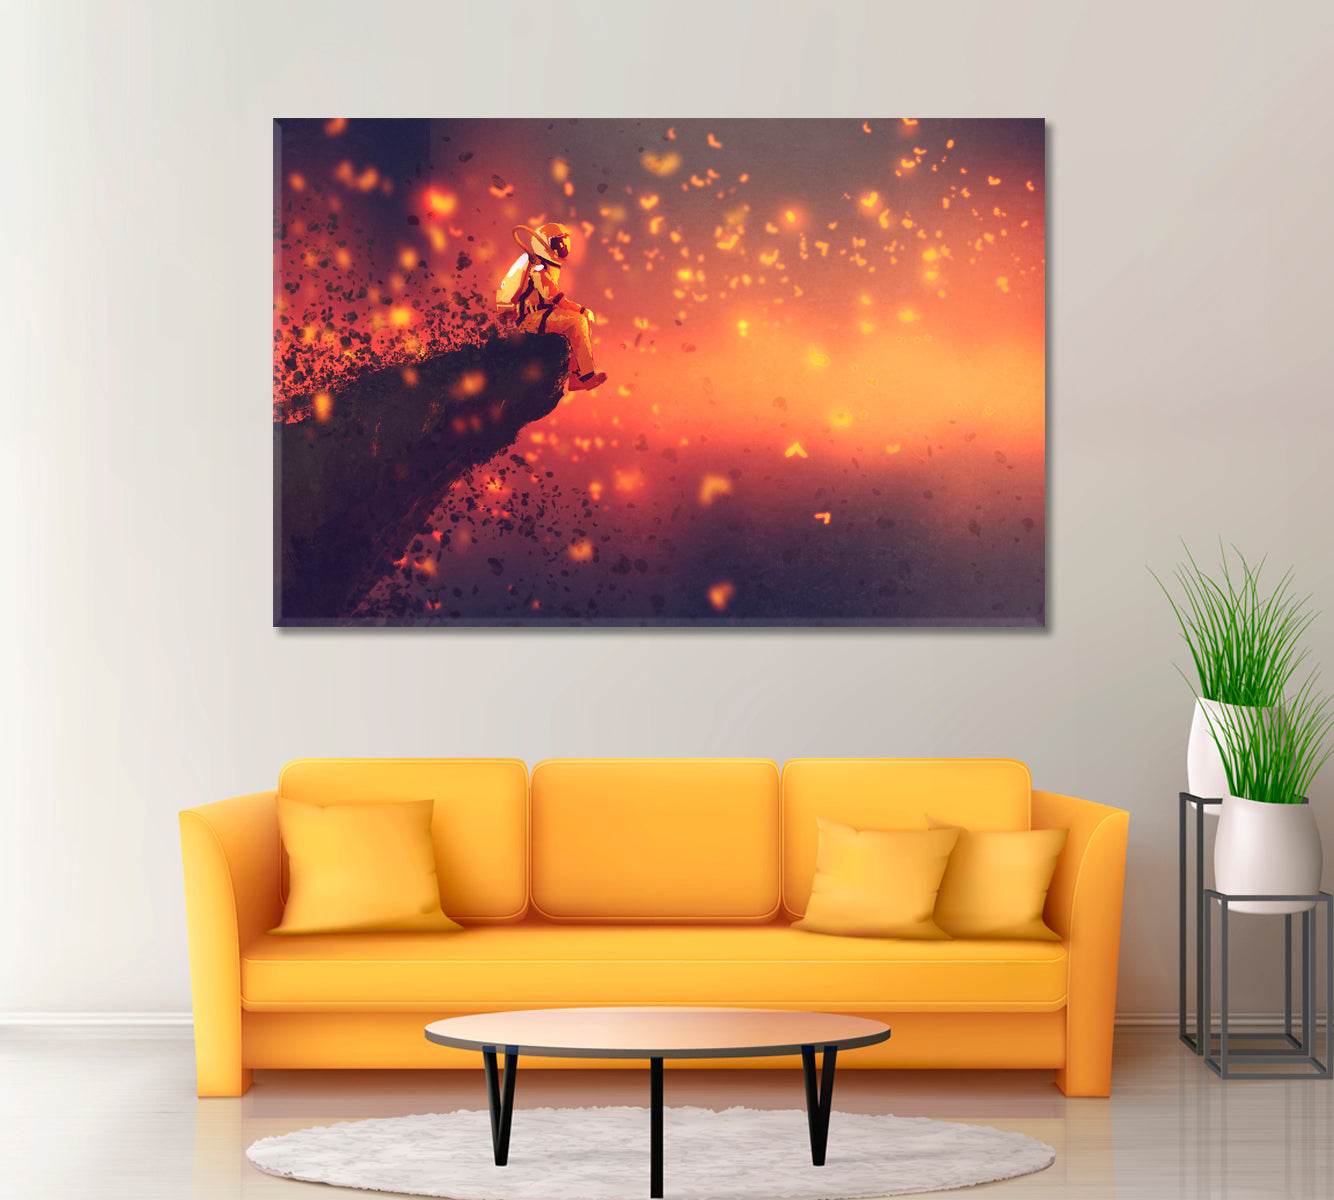 Astronaut Looking at Fireflies Canvas Print ArtLexy 1 Panel 24"x16" inches 